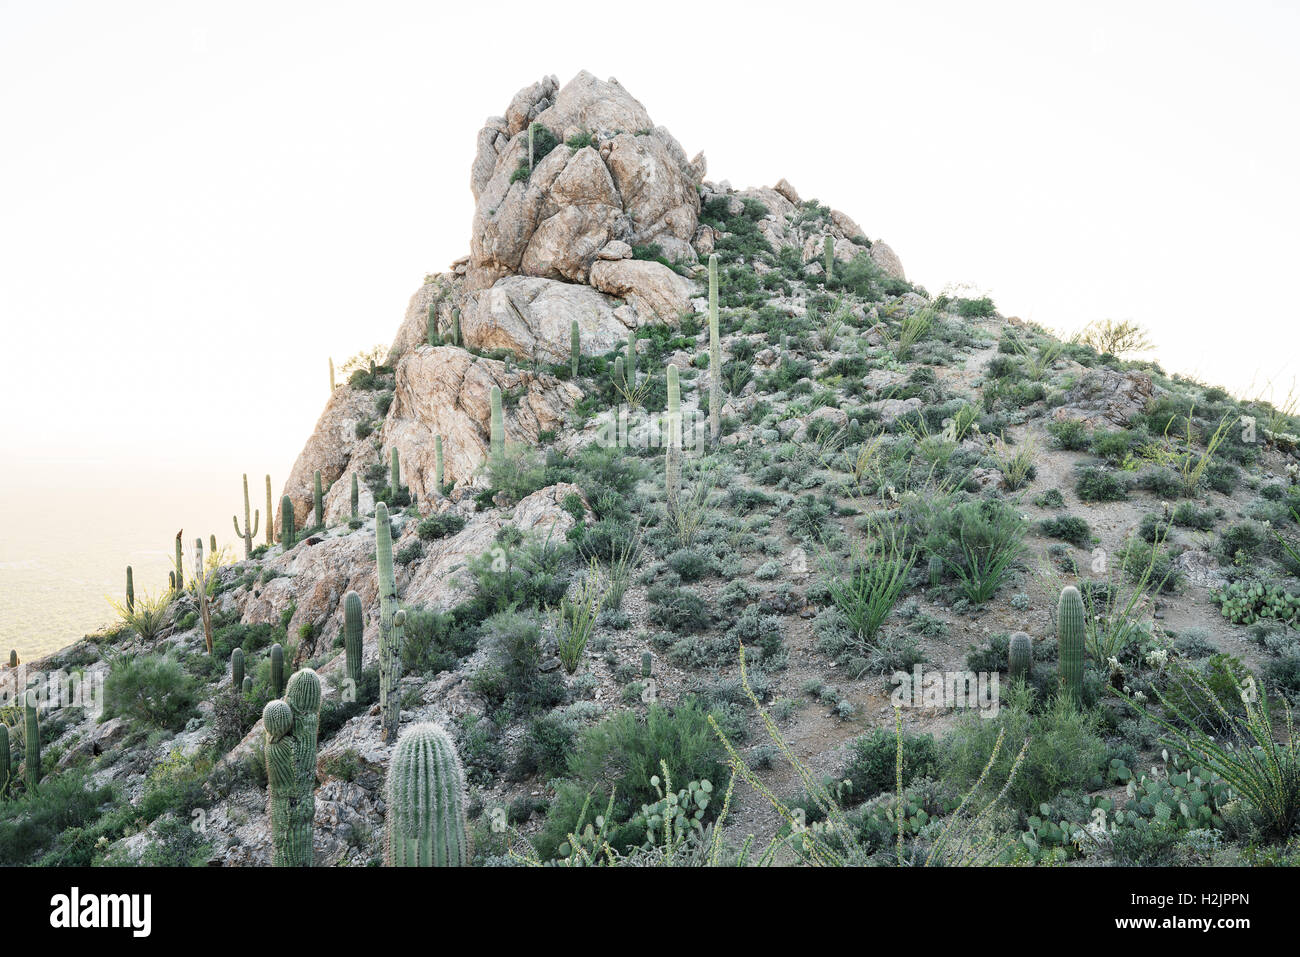 A shrub covered mountain in Saguaro National Park Stock Photo